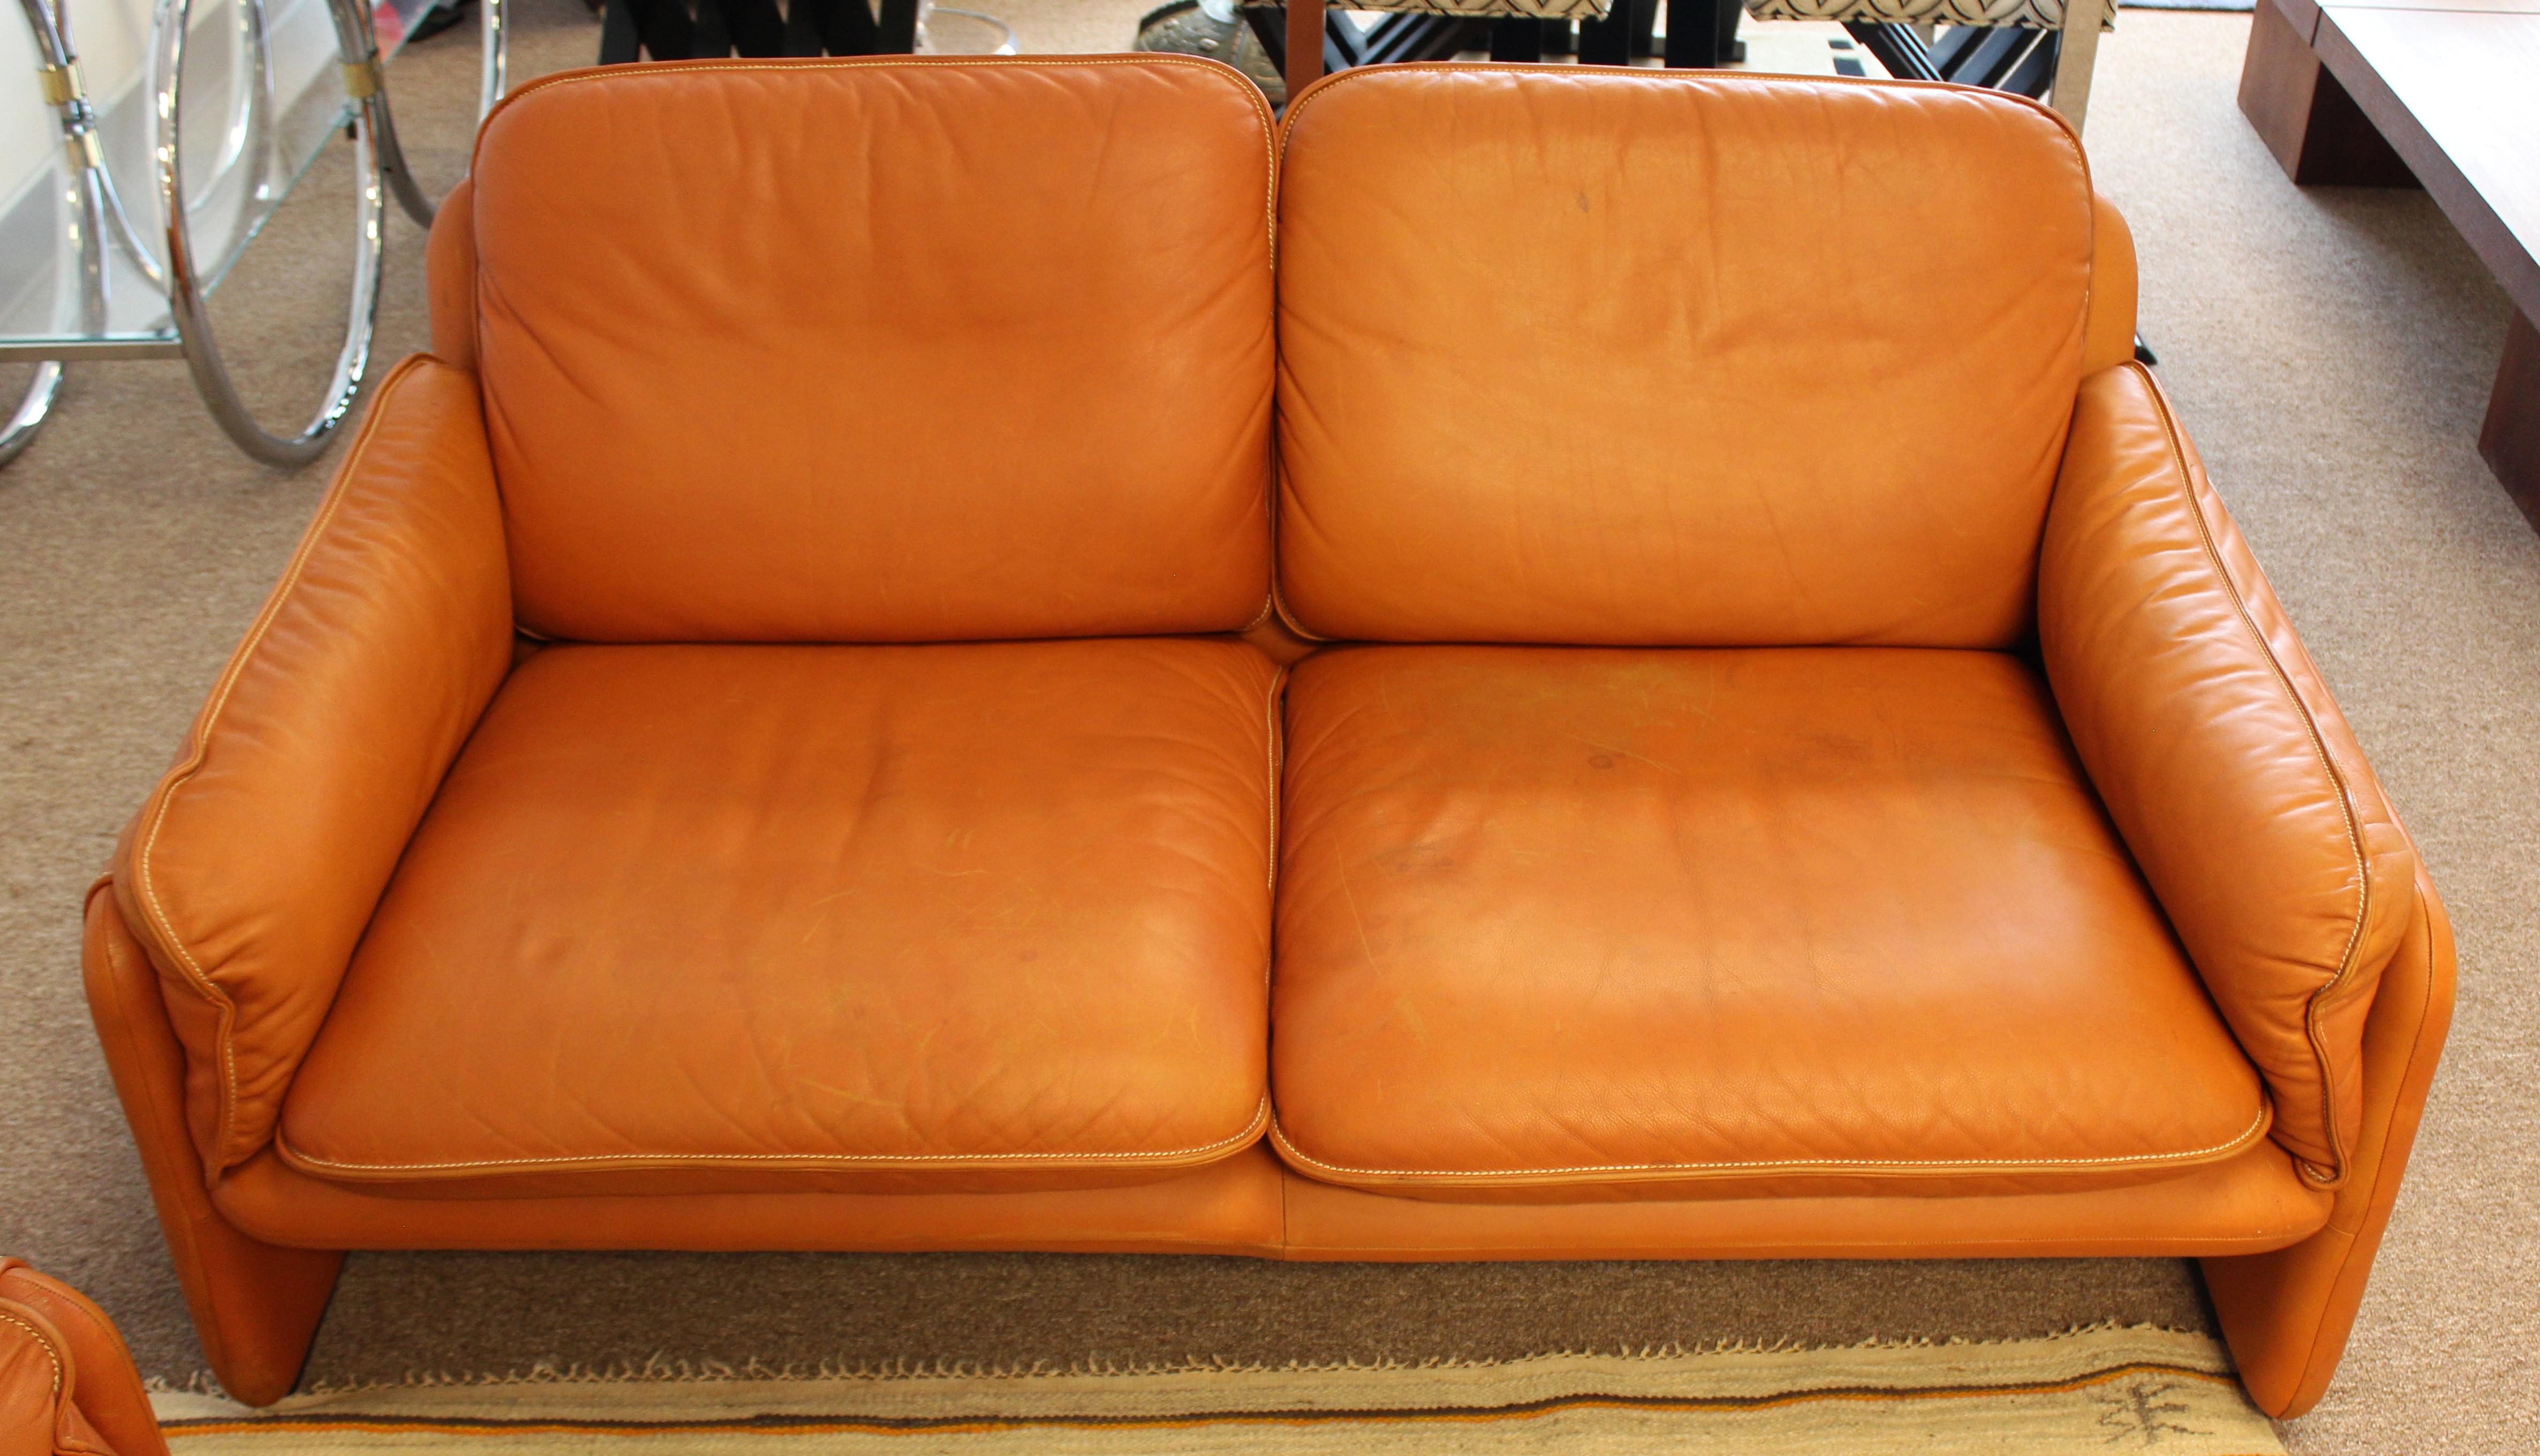 Late 20th Century Mid-Century Modern Pair of Leather Sofa & Loveseat by De Sede, Switzerland 1970s